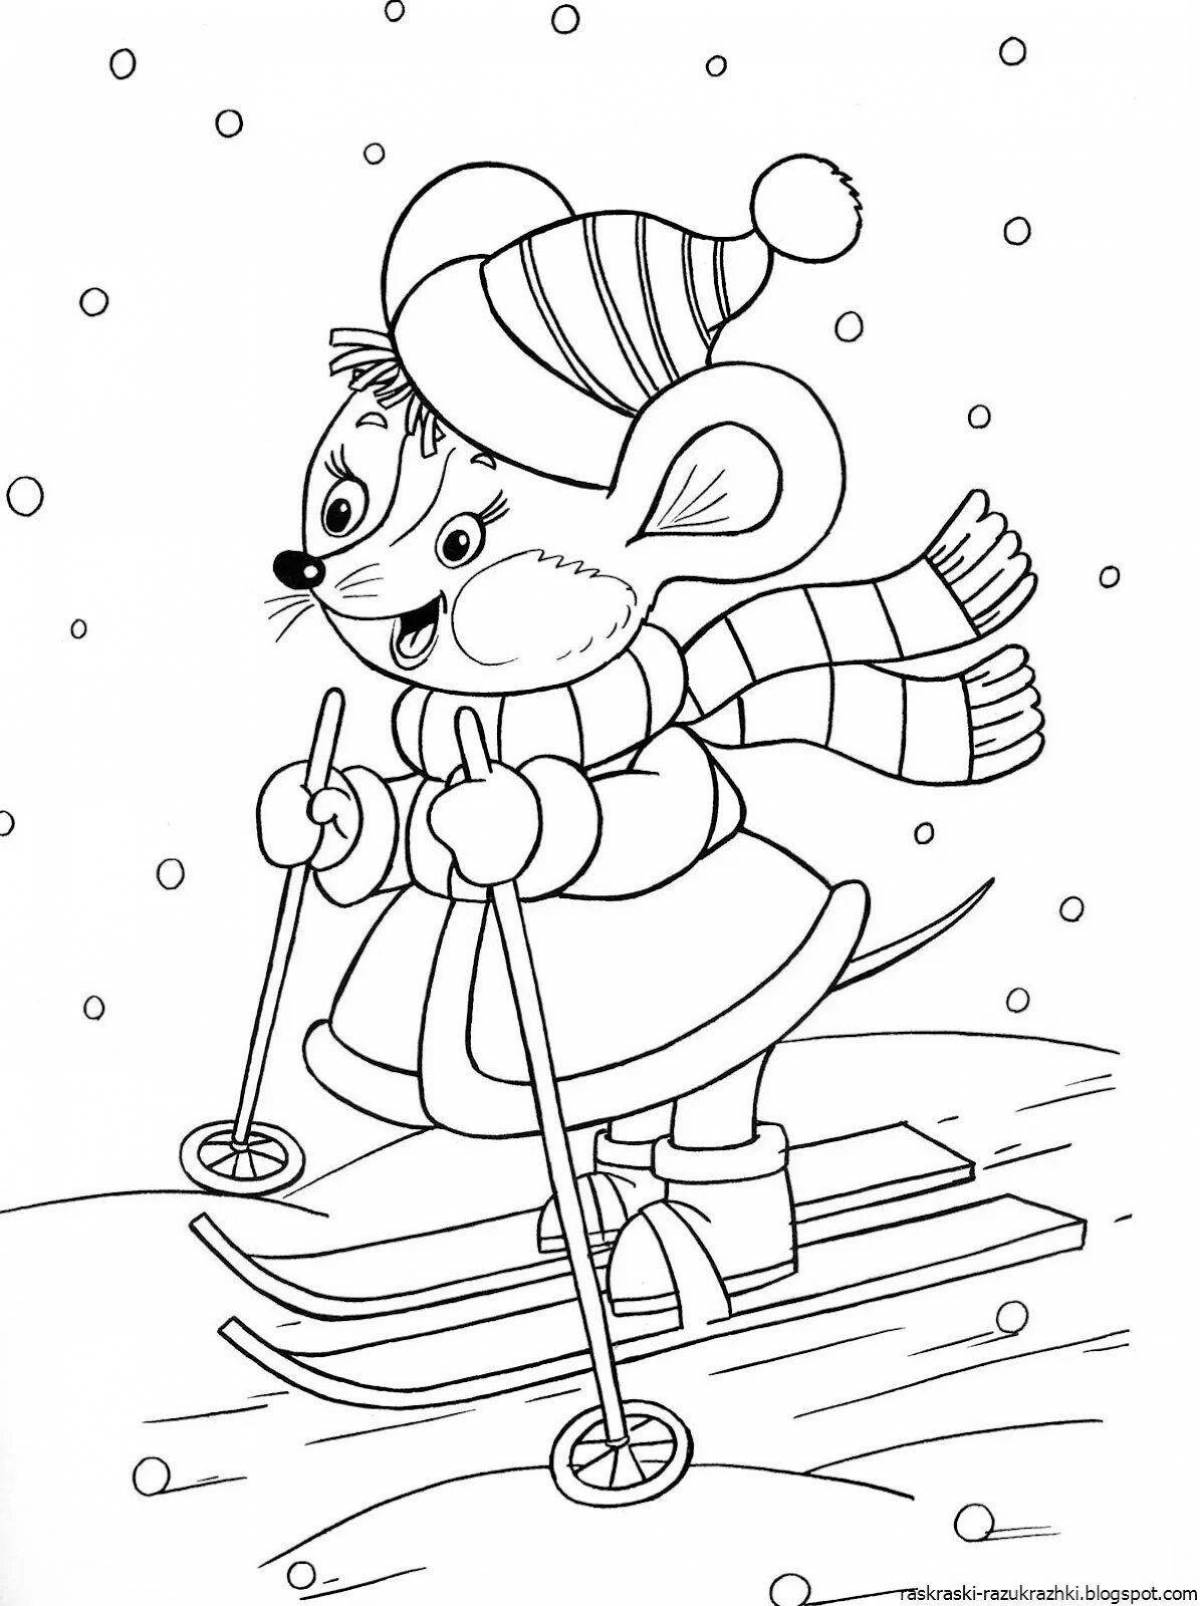 Radiant coloring book for children 3-4 years old winter